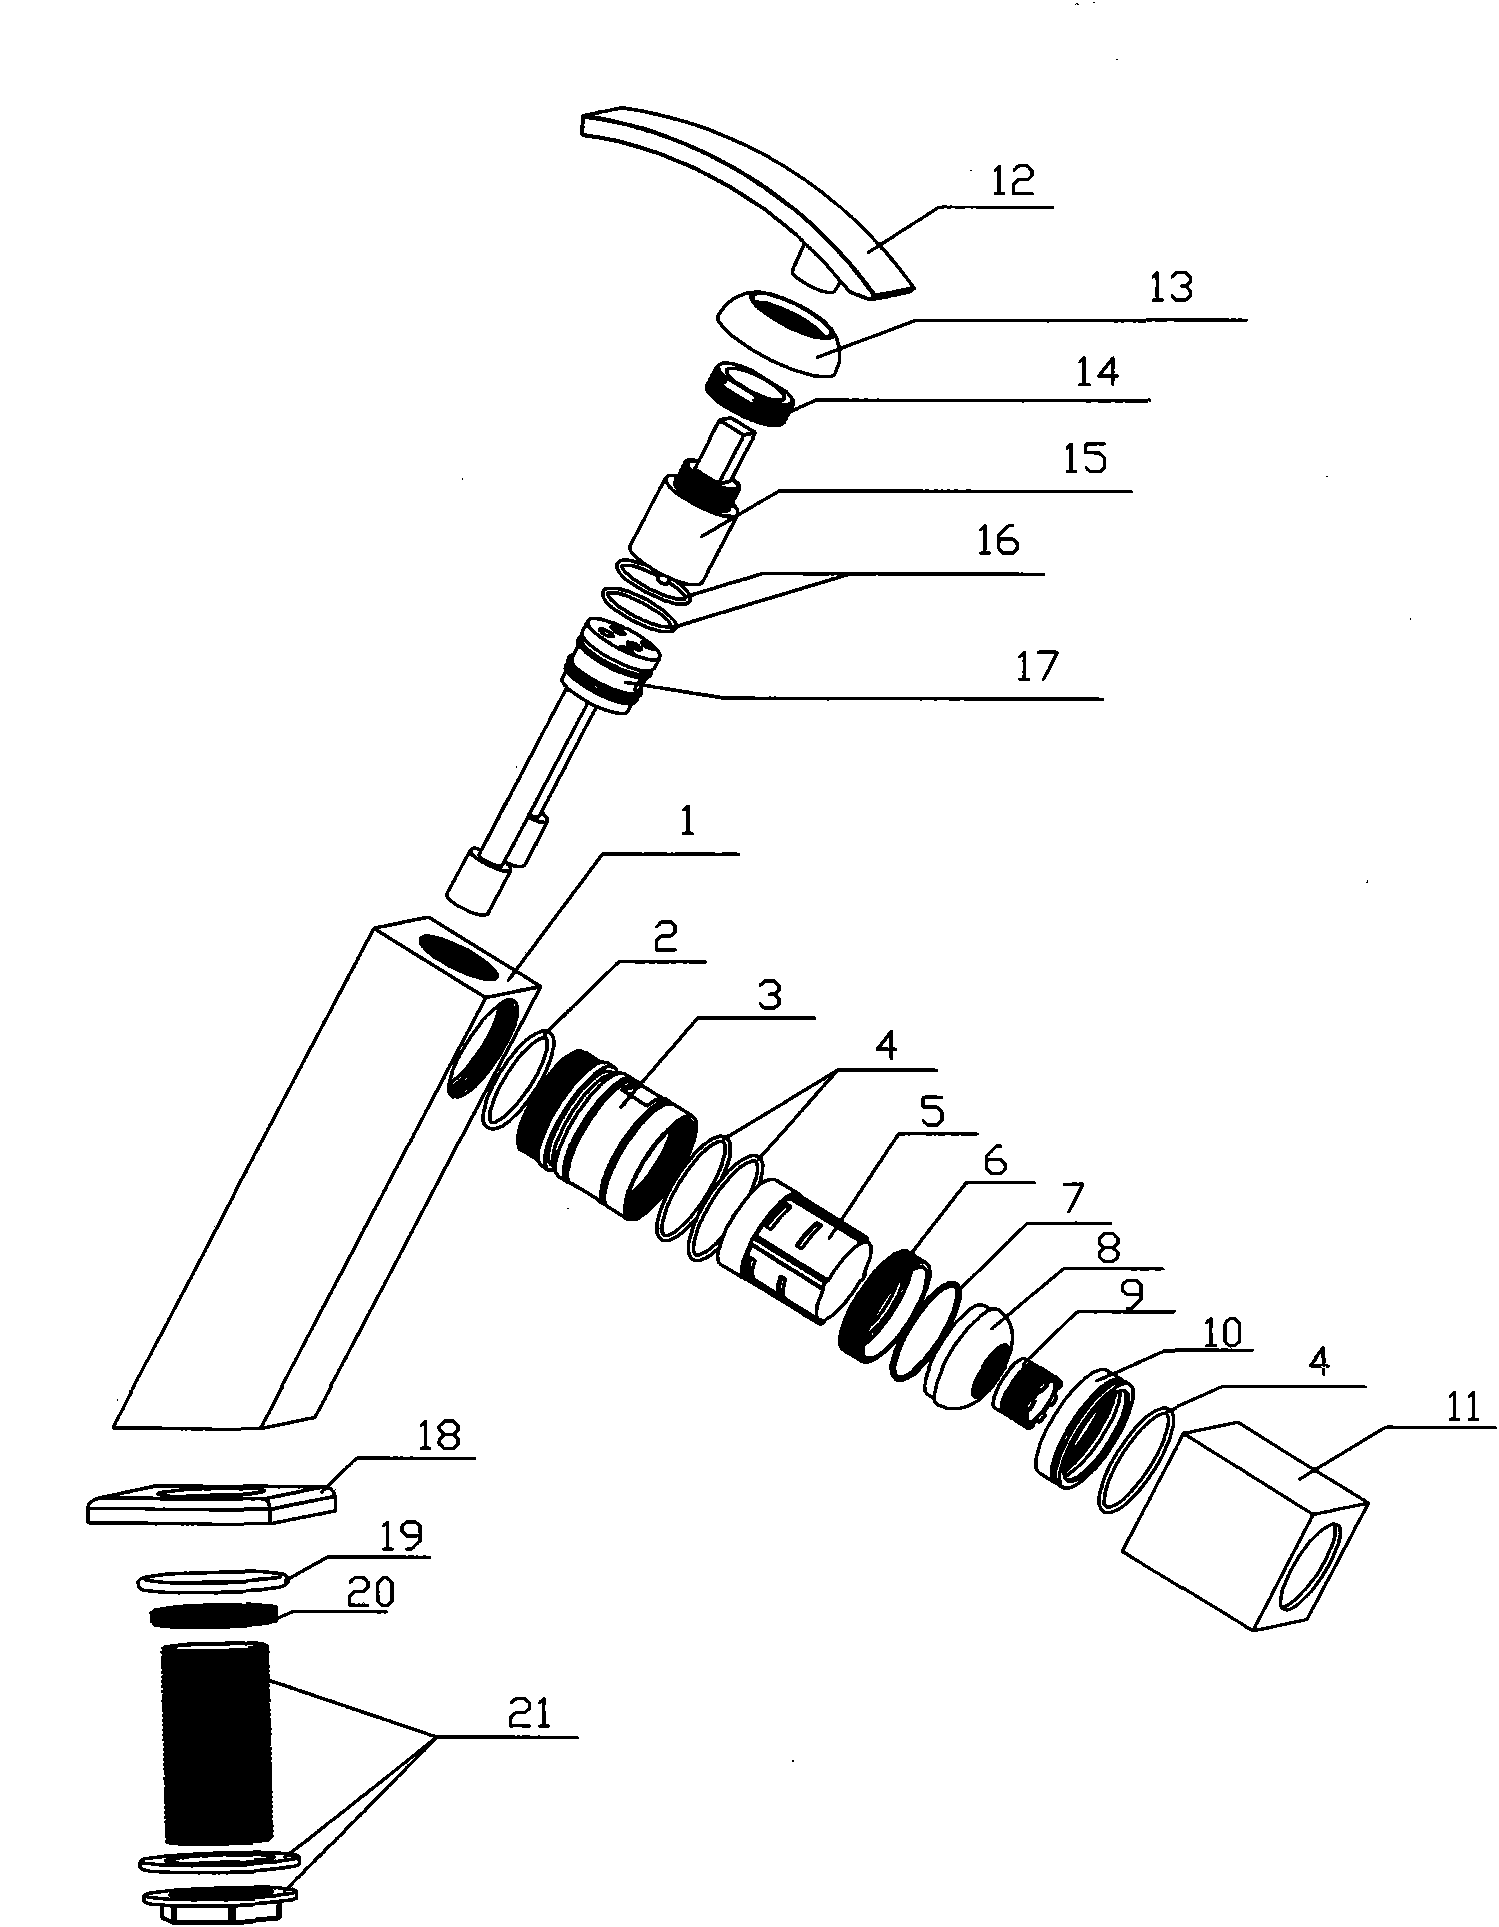 Water tap with light-emitting device